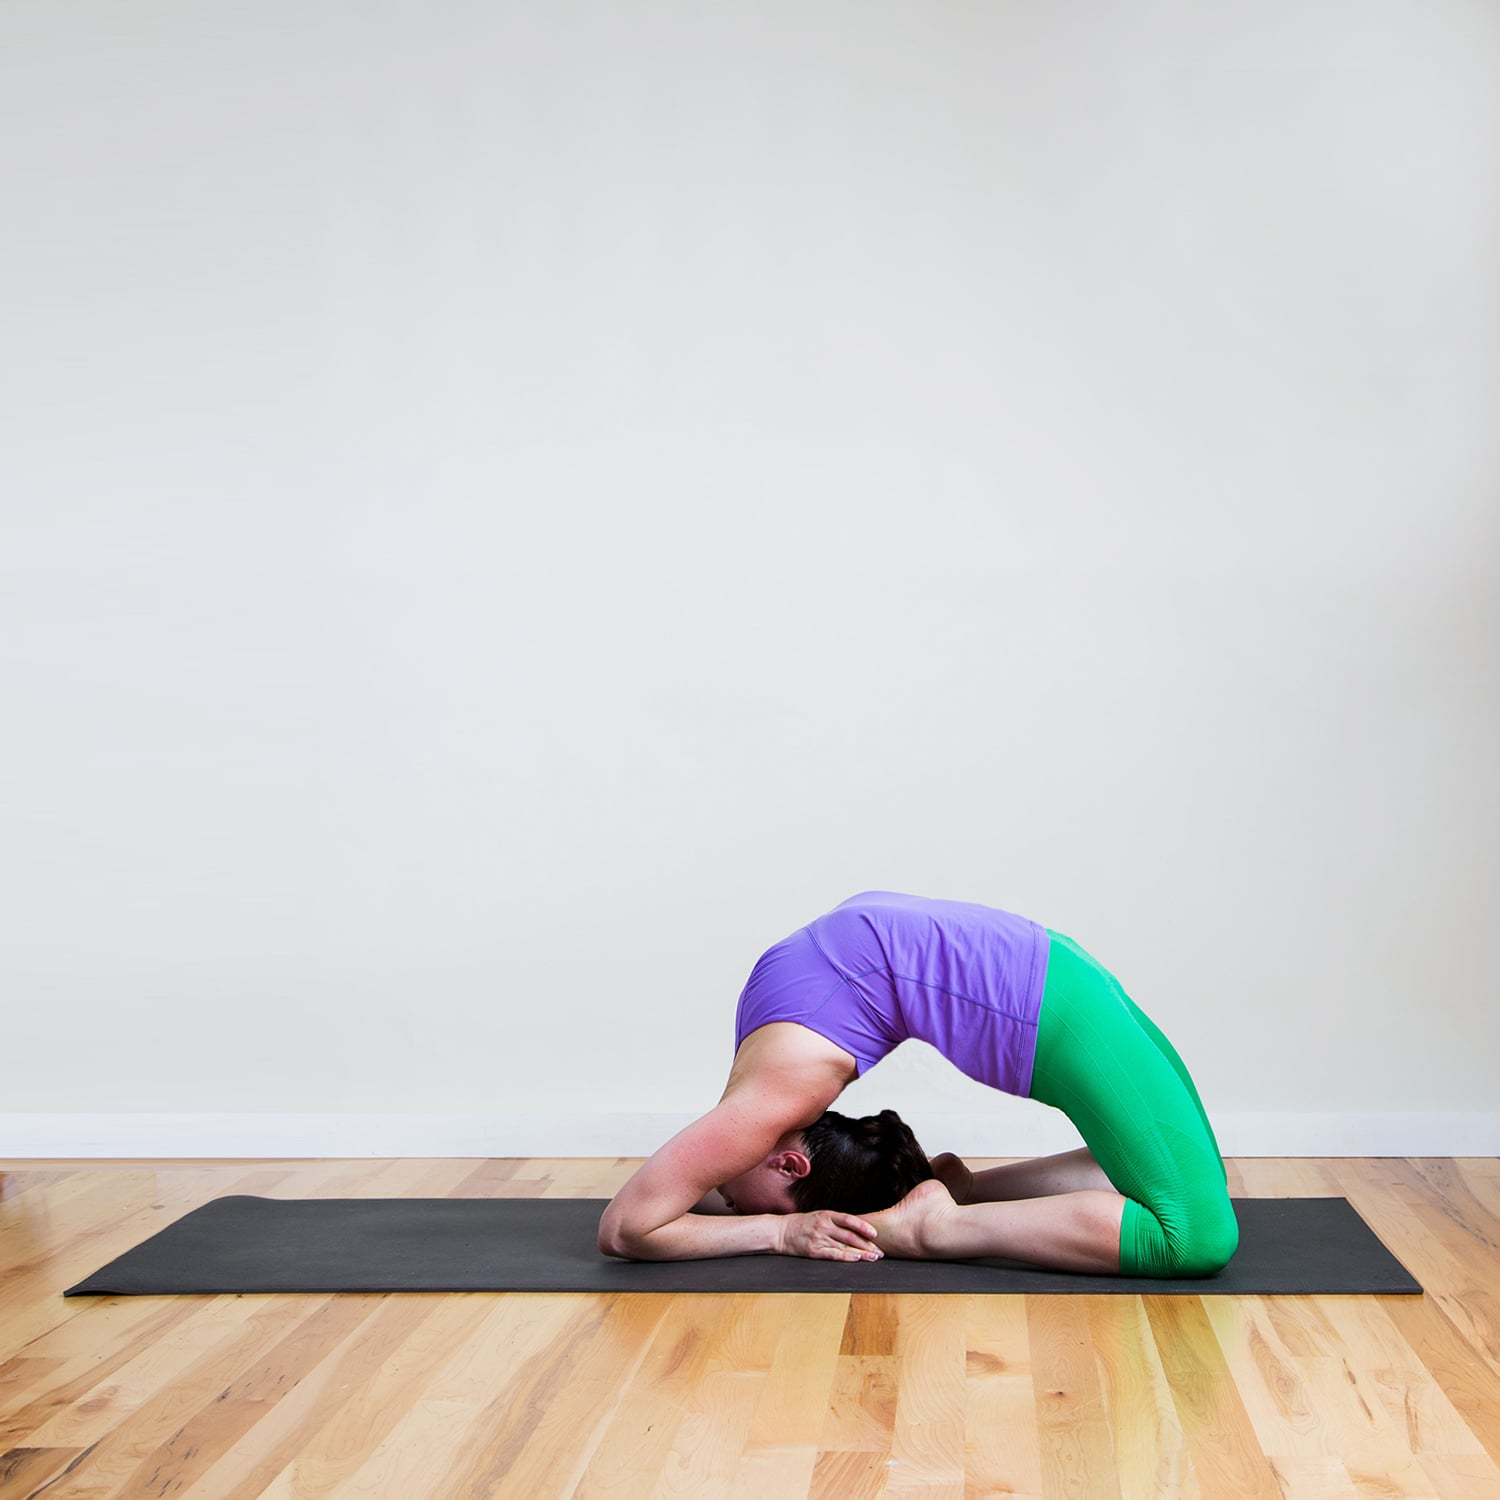 How to Know You're Ready for an Advanced Yoga Pose